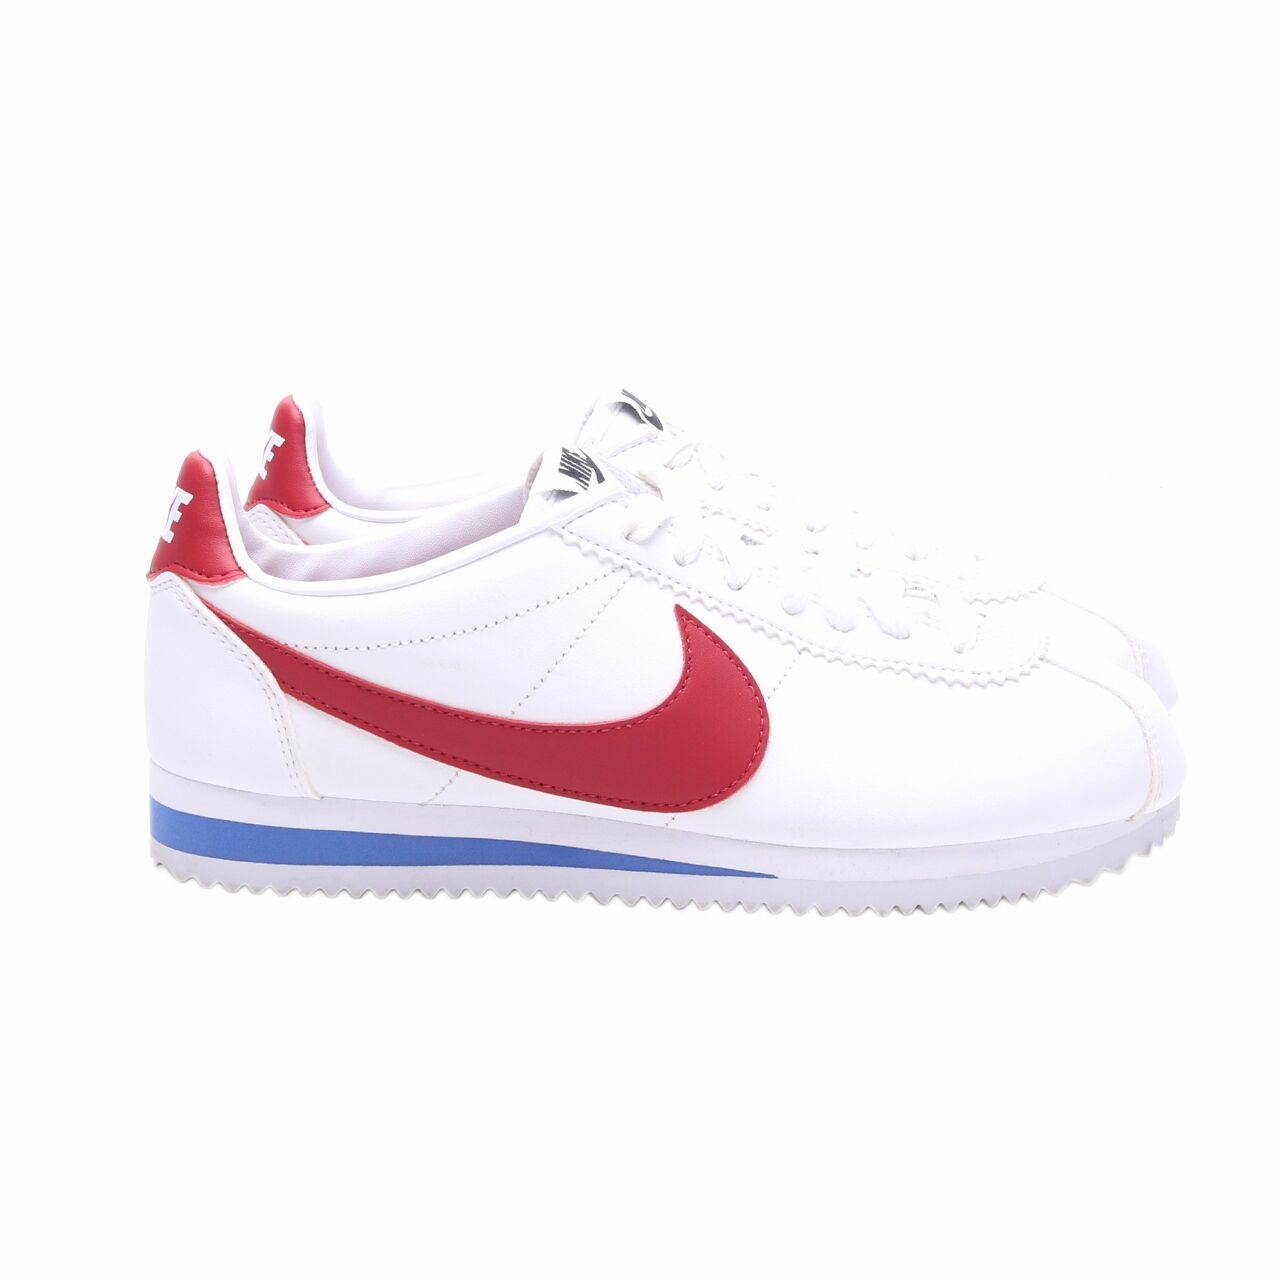 Nike WMNS Classic Cortez Leather Sneakers